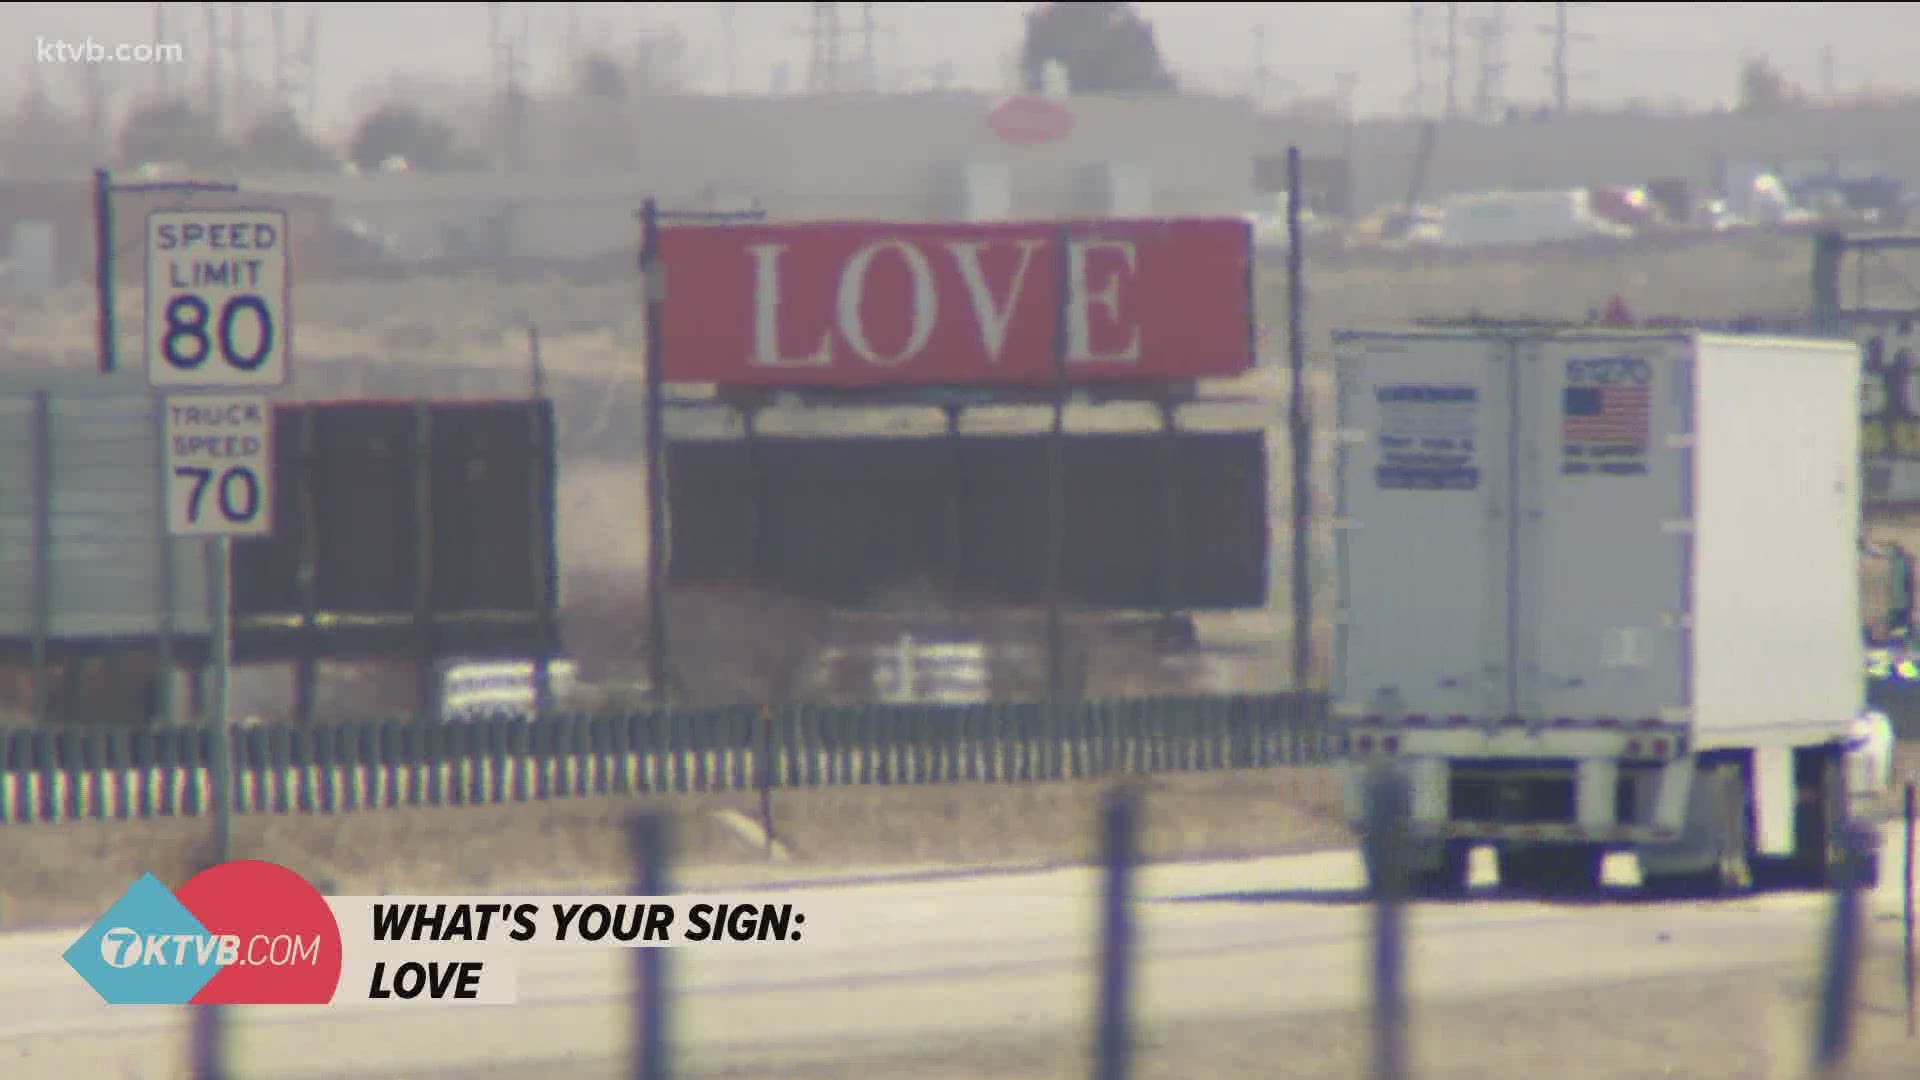 With simple "LOVE" billboards in Boise, she hopes others will think of their stories of love when they see the signs.